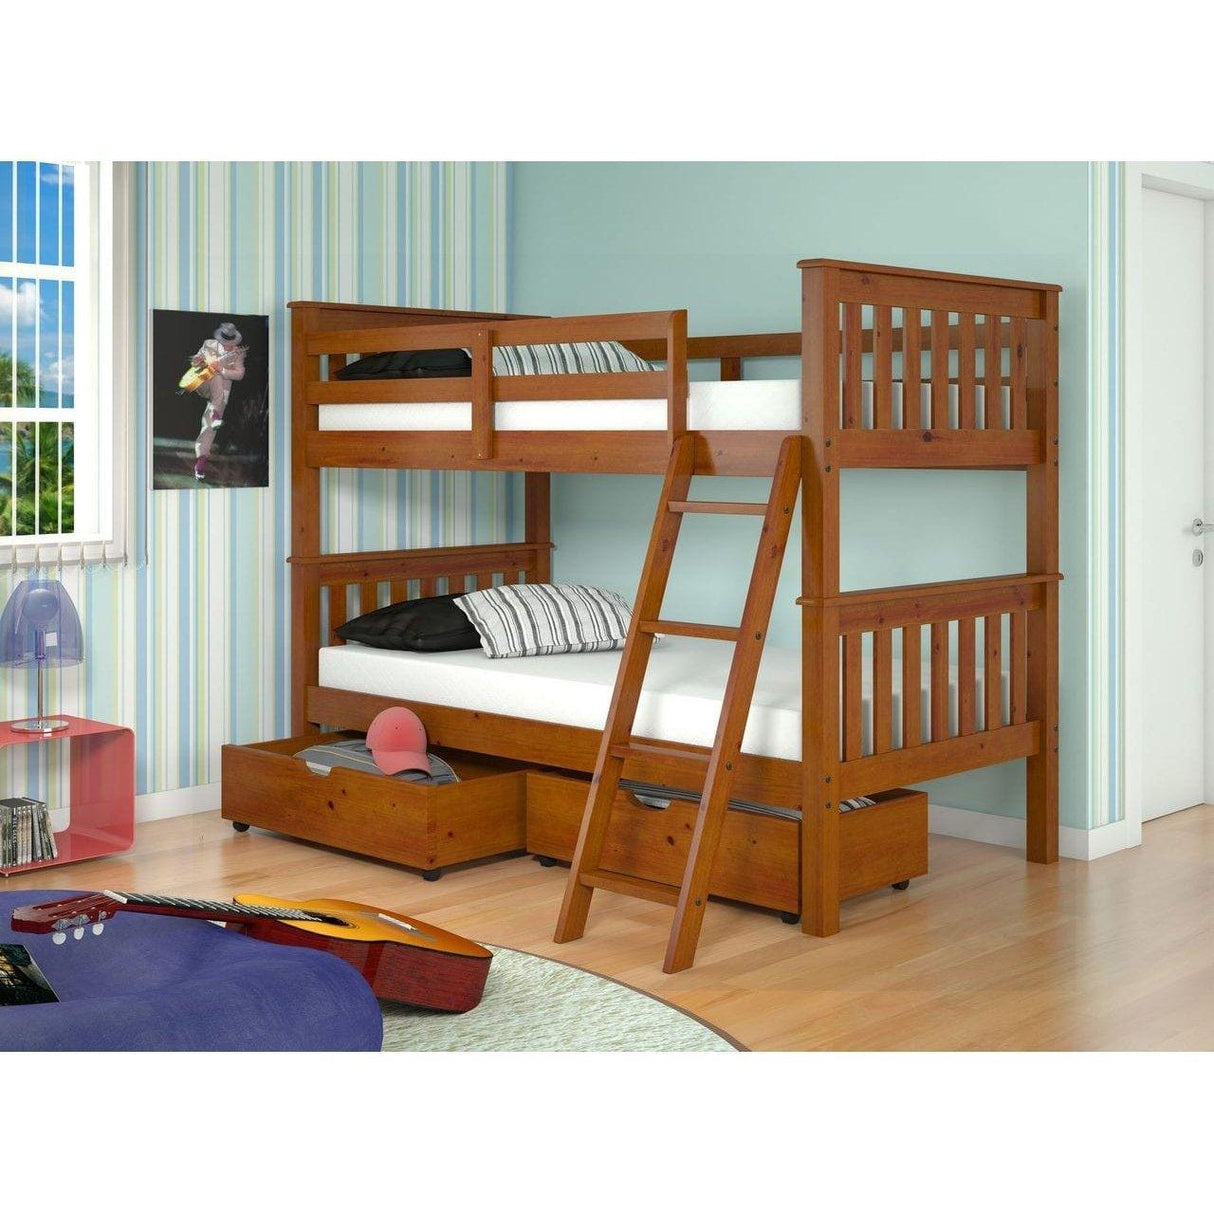 Donco Twin/Twin Mission Bunk Bed With Slat Kit And Dual Under Bed Drawers Light Espresso Finish 120-1-TTE_TT_505-E - Bedroom Depot USA